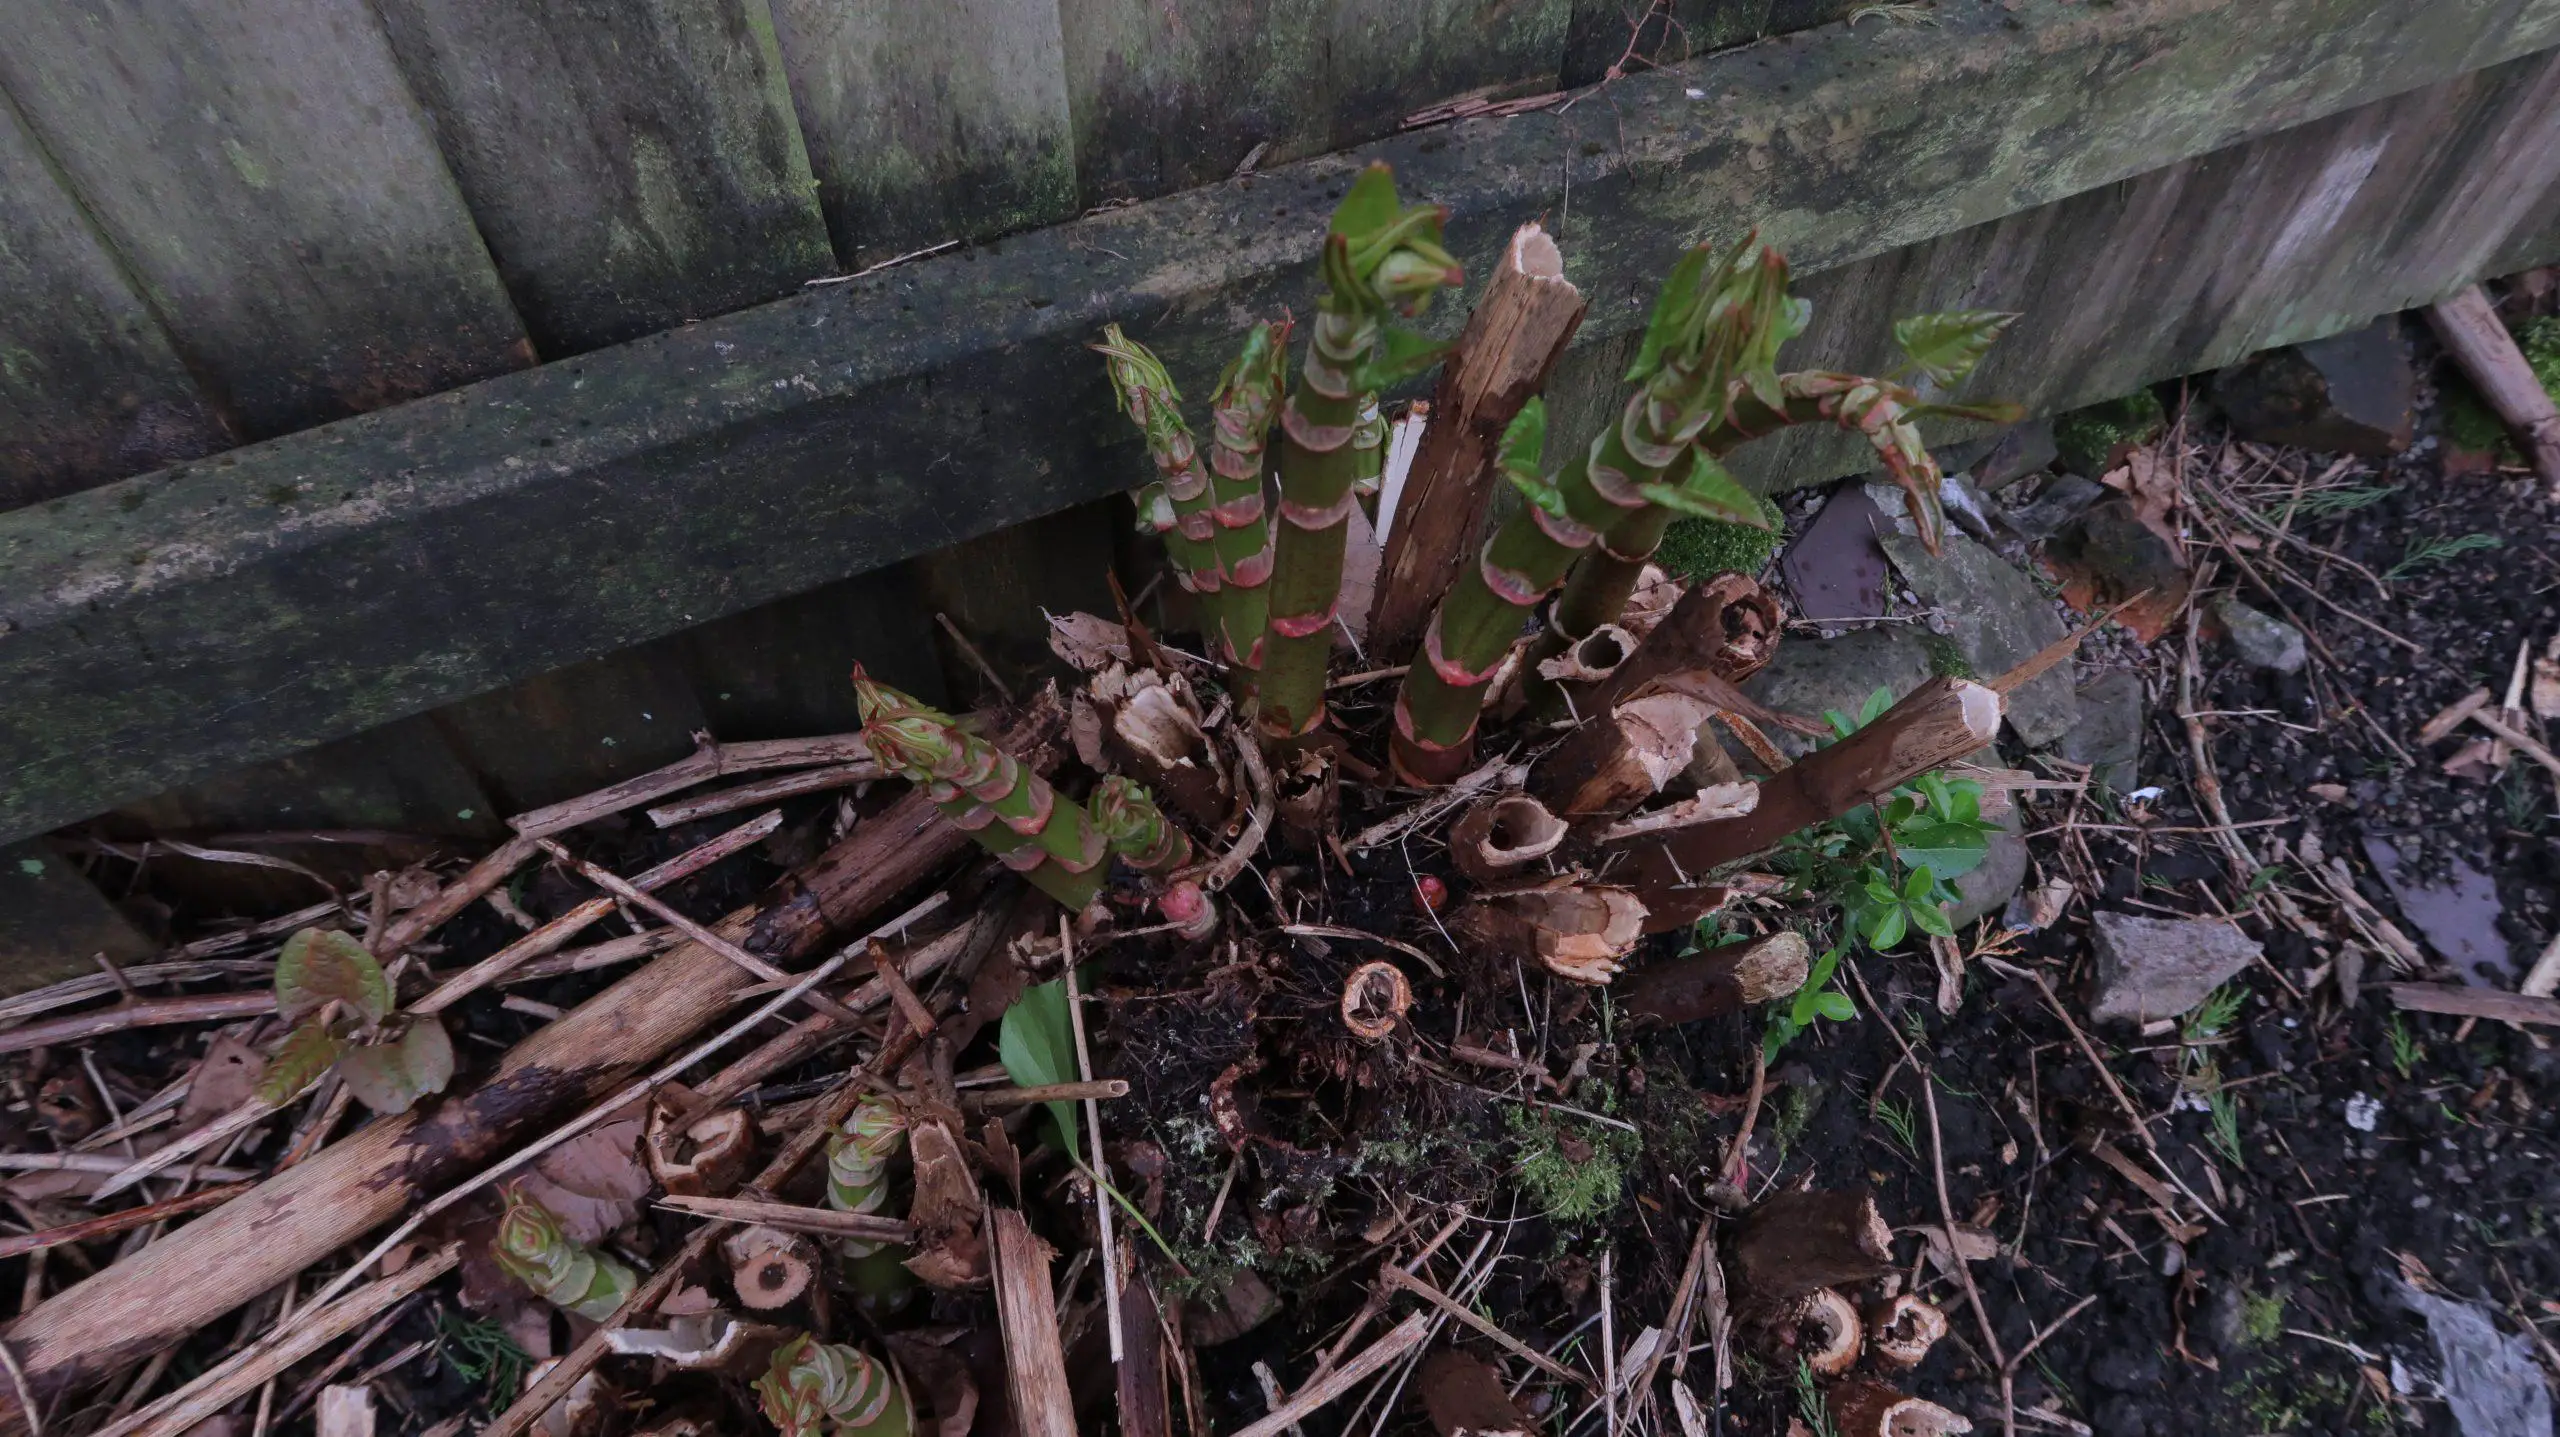 Japanese knotweed devastates the local ecosystem and causes further soil erosion